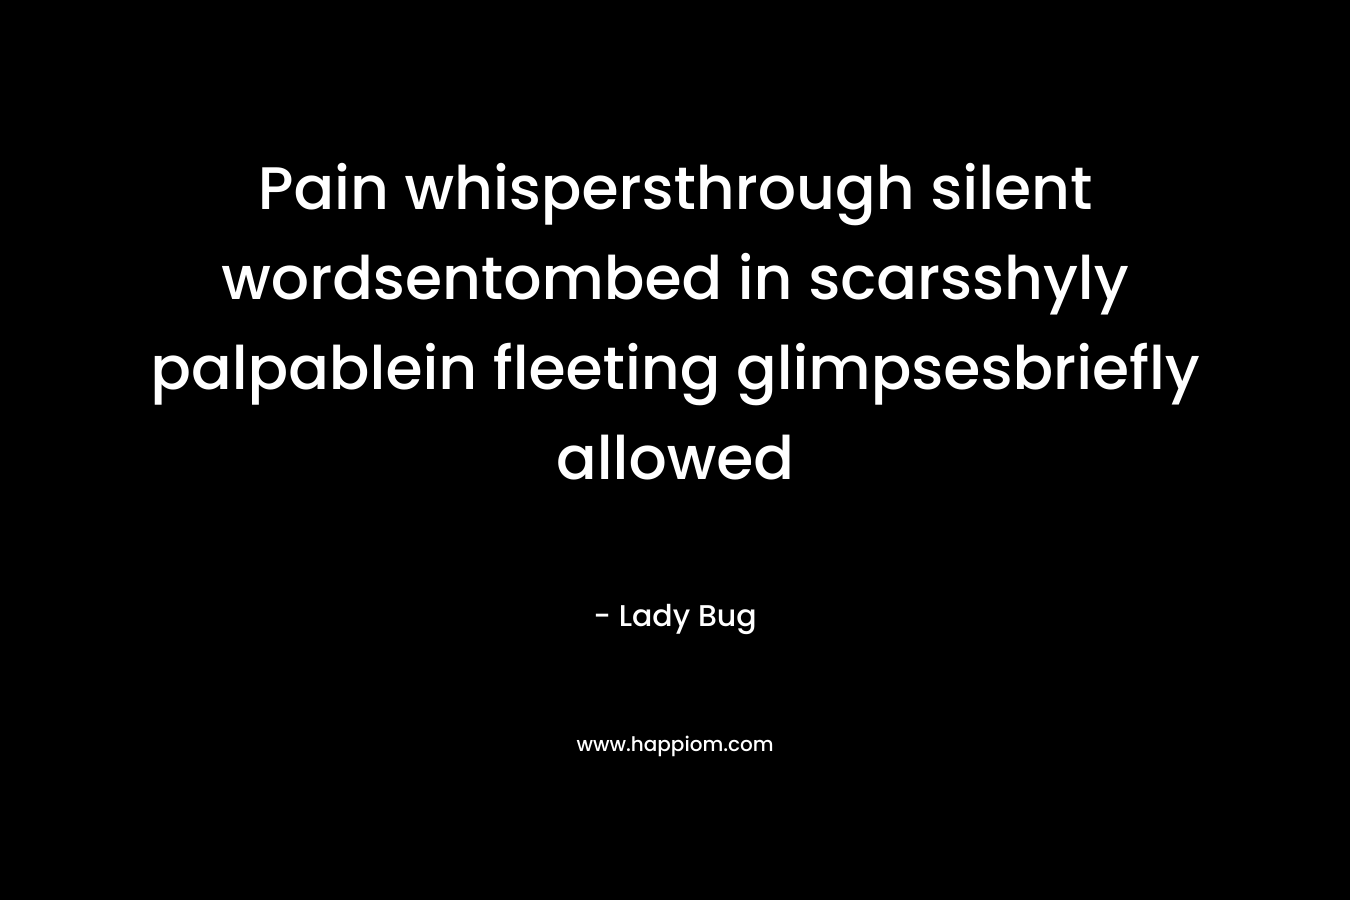 Pain whispersthrough silent wordsentombed in scarsshyly palpablein fleeting glimpsesbriefly allowed